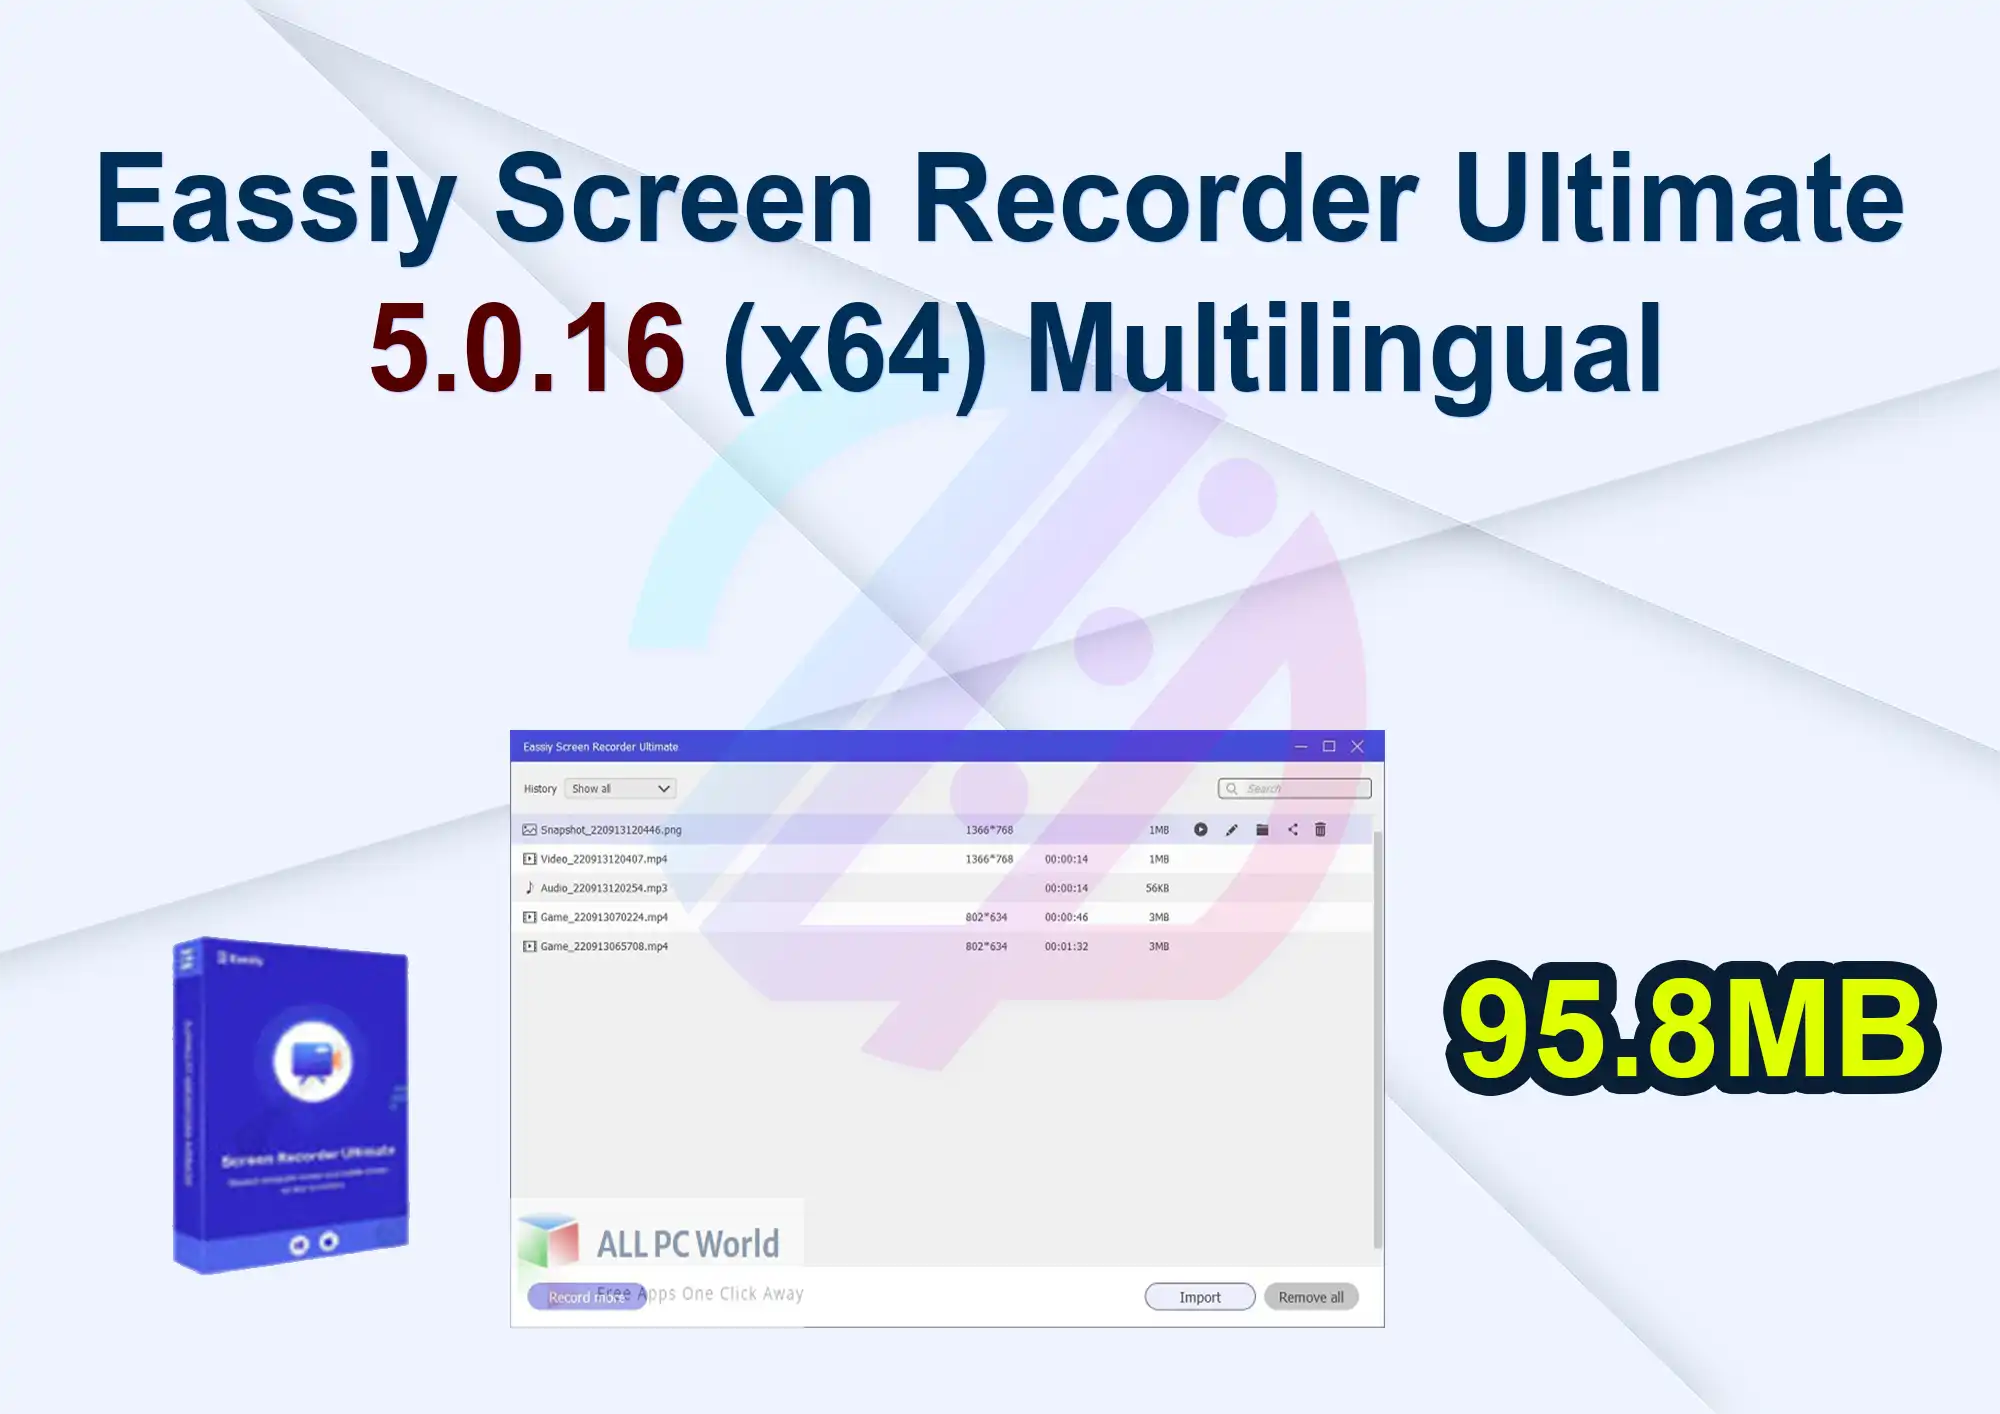 Eassiy Screen Recorder Ultimate 5.0.16 (x64) Multilingual